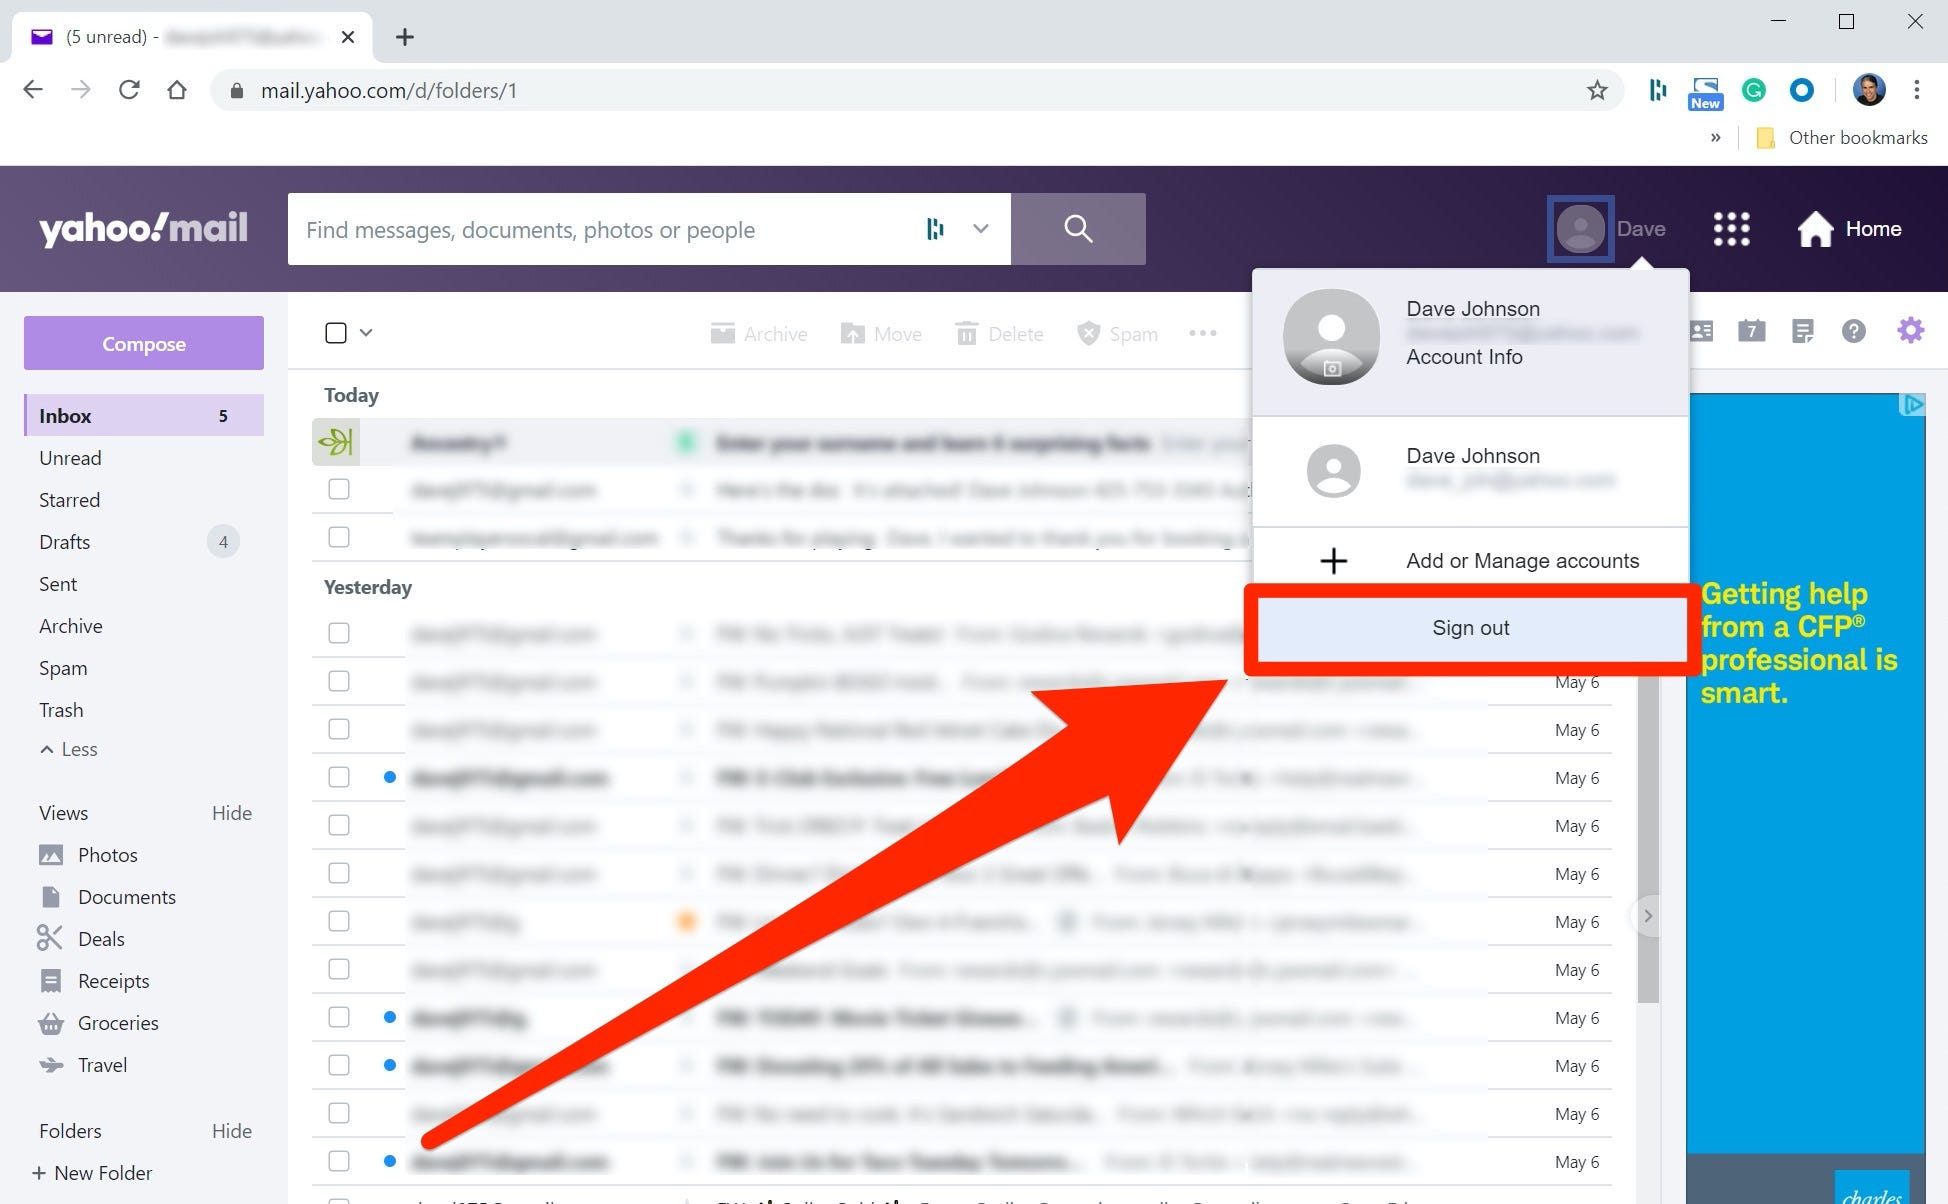 how to sign out in yahoo mail ipad